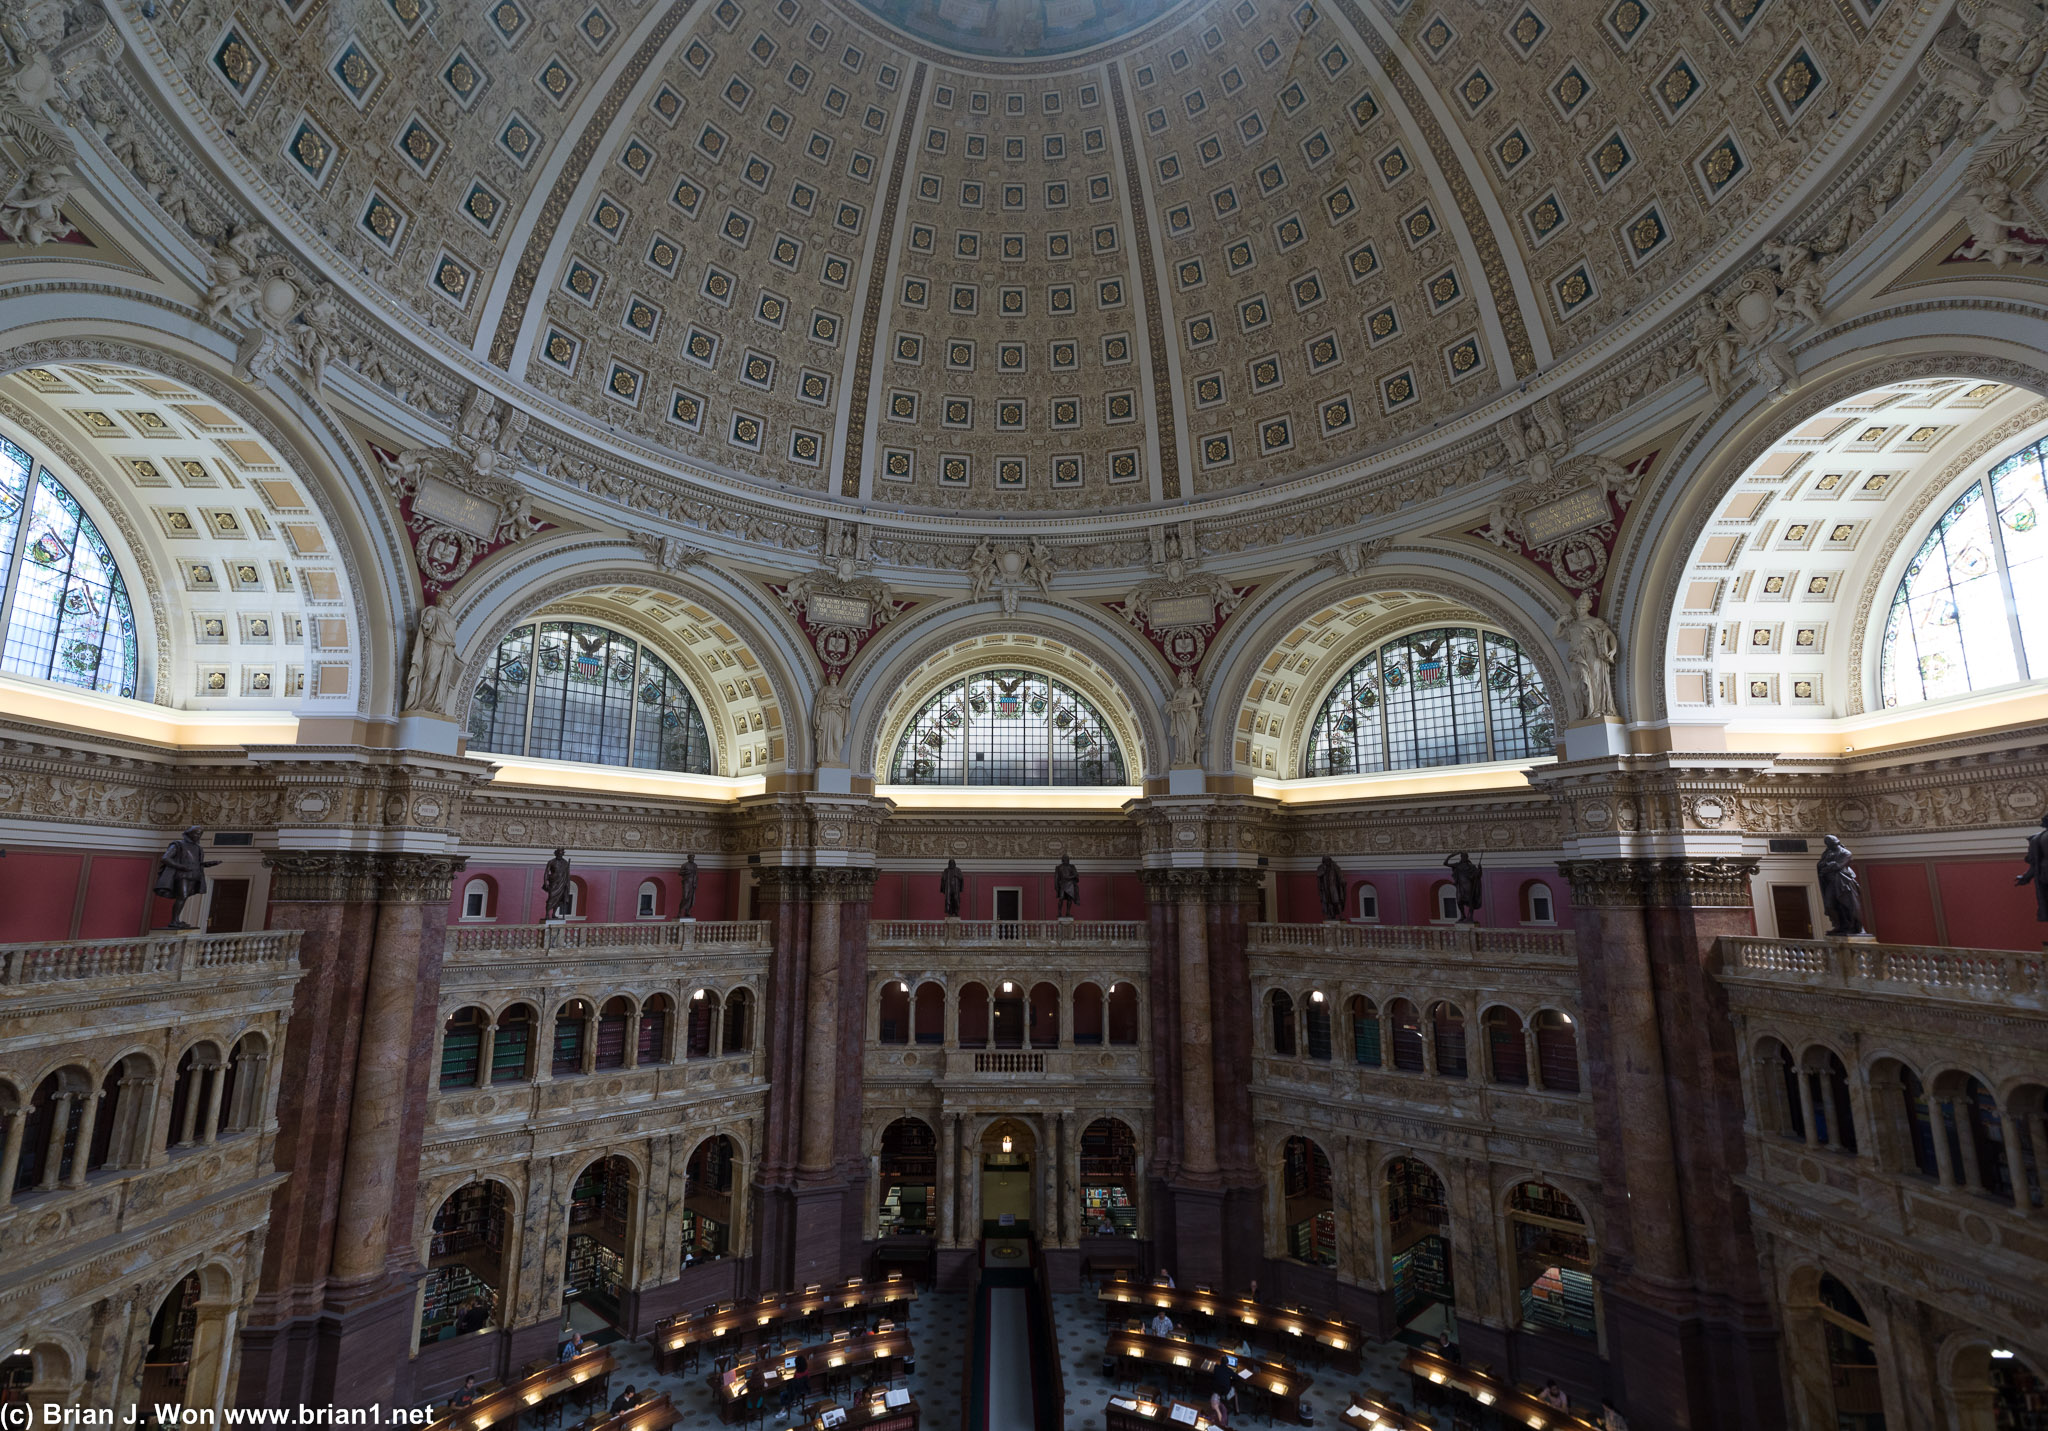 The famous main reading room.